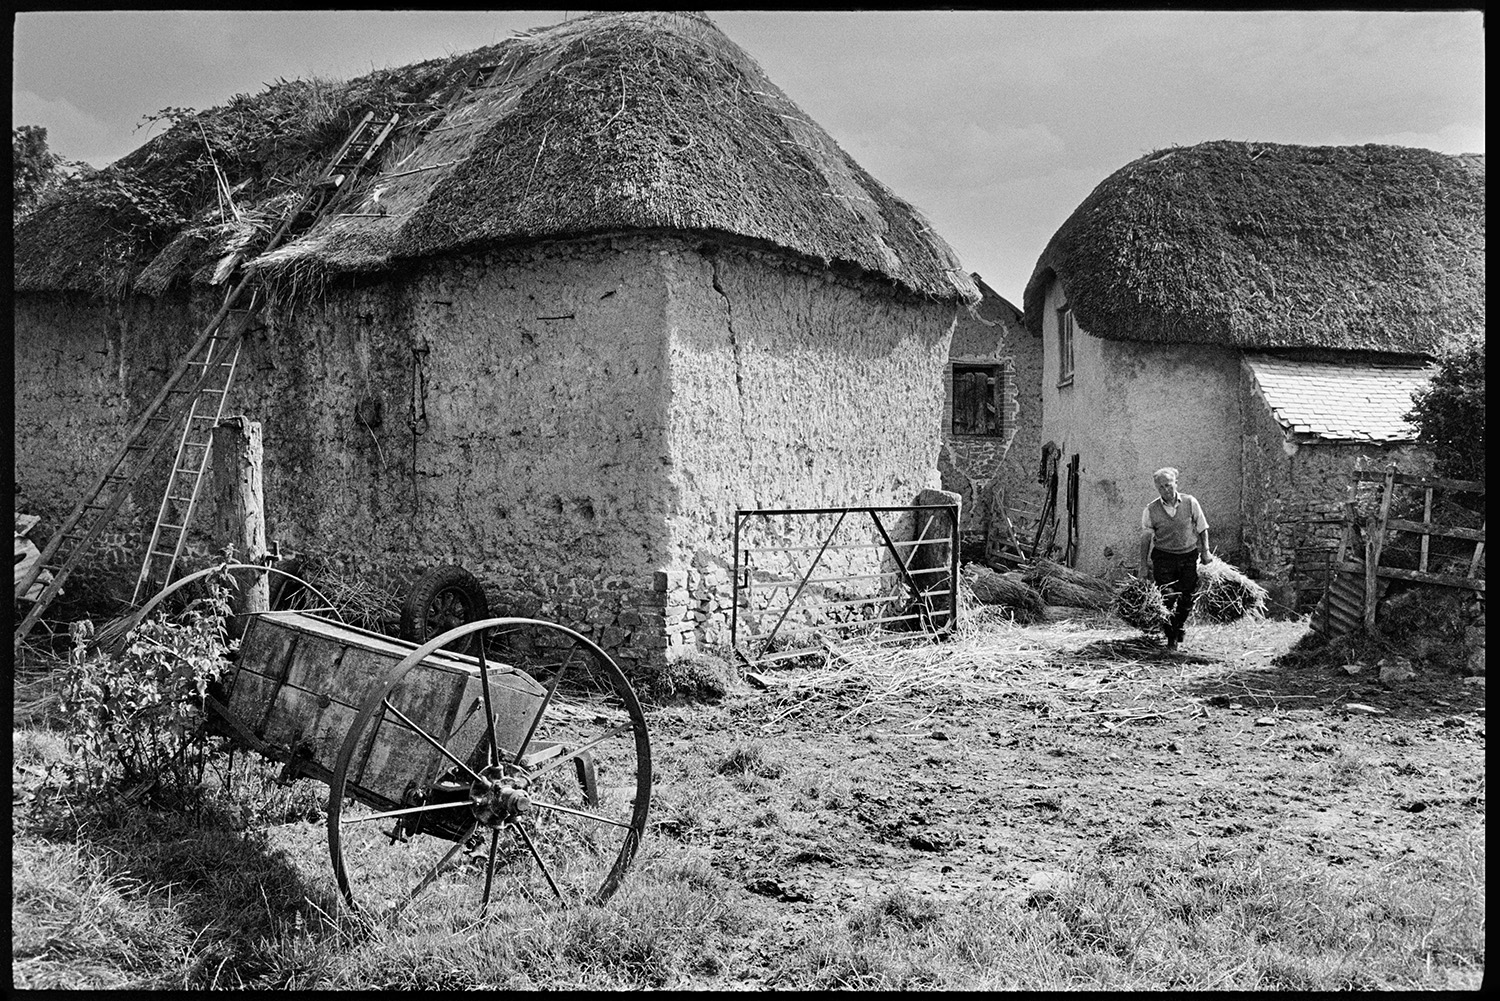 Cob barn being thatched, seed drill in foreground. 
[A cob barn which is being re-thatched at Newhouse, Ashreigney. Bill Hammond is walking through the farmyard carrying two nitches of reed. Two ladders are resting against the barn and a wooden seed drill is visible in the foreground.]